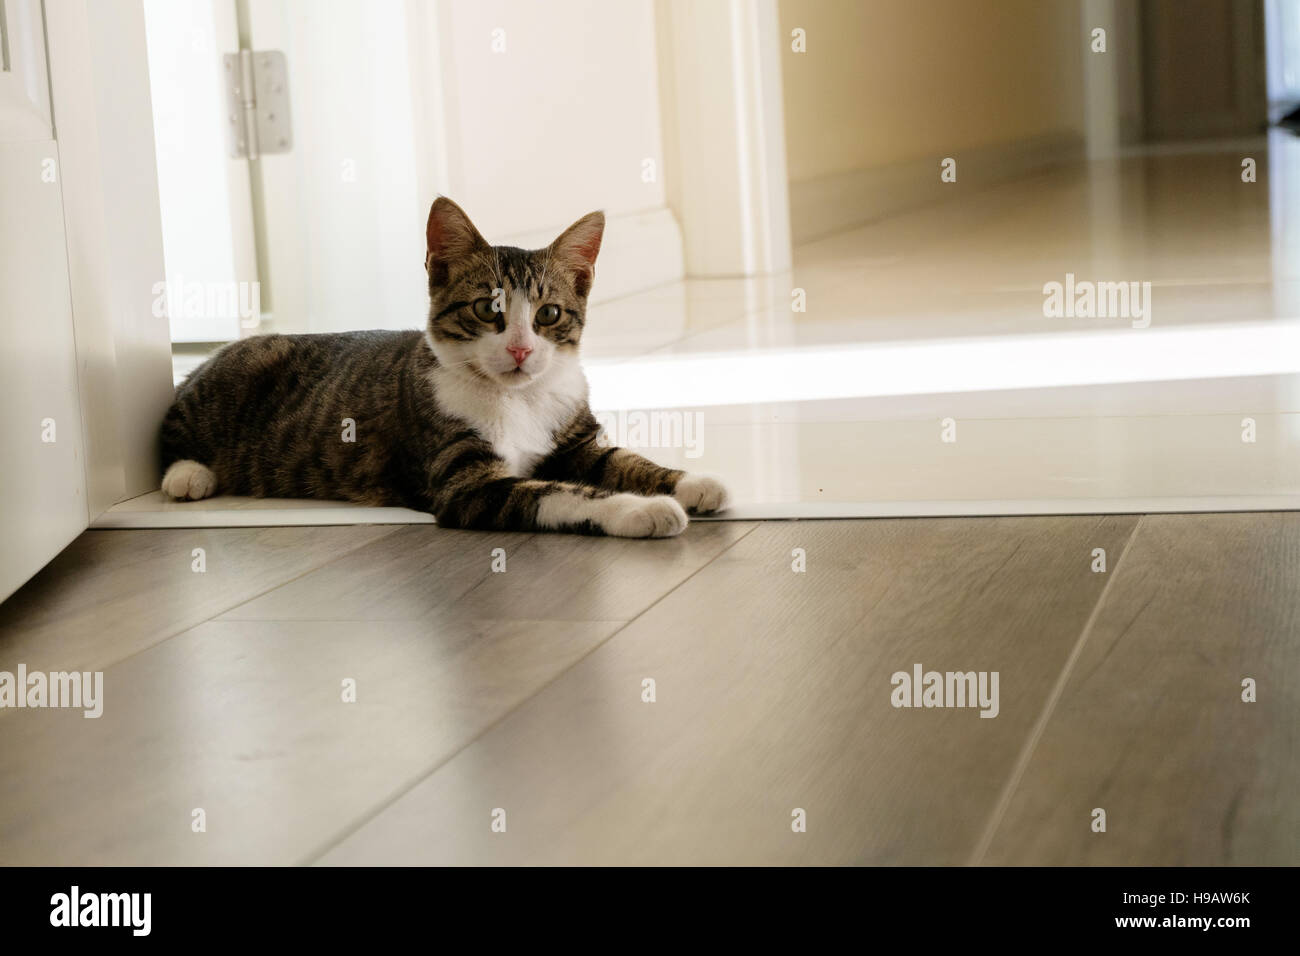 Black and white cat sitting on an open door Stock Photo